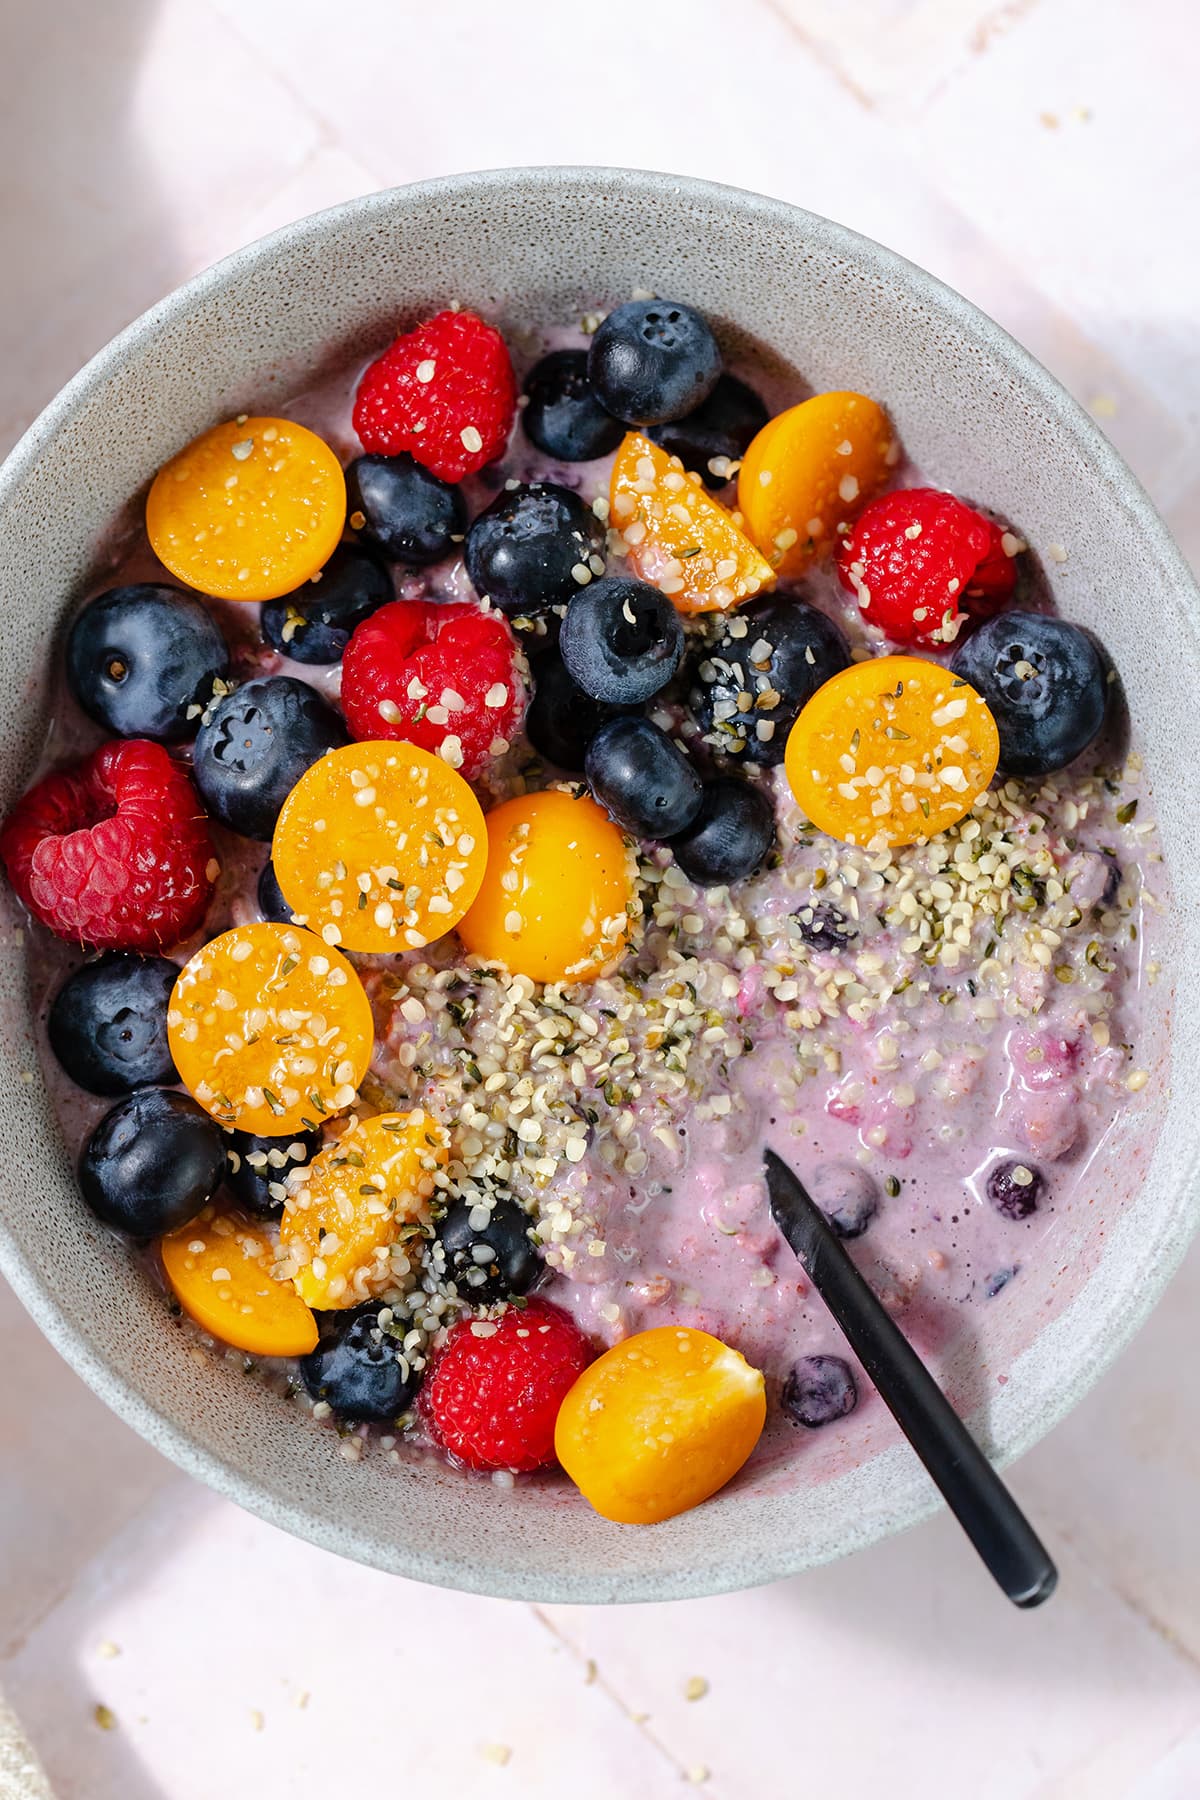 Overhead shot of blueberry overnight oats in a grey bowl topped with blueberries, raspberries, golden berries, and hemp seeds. Pink tile background.